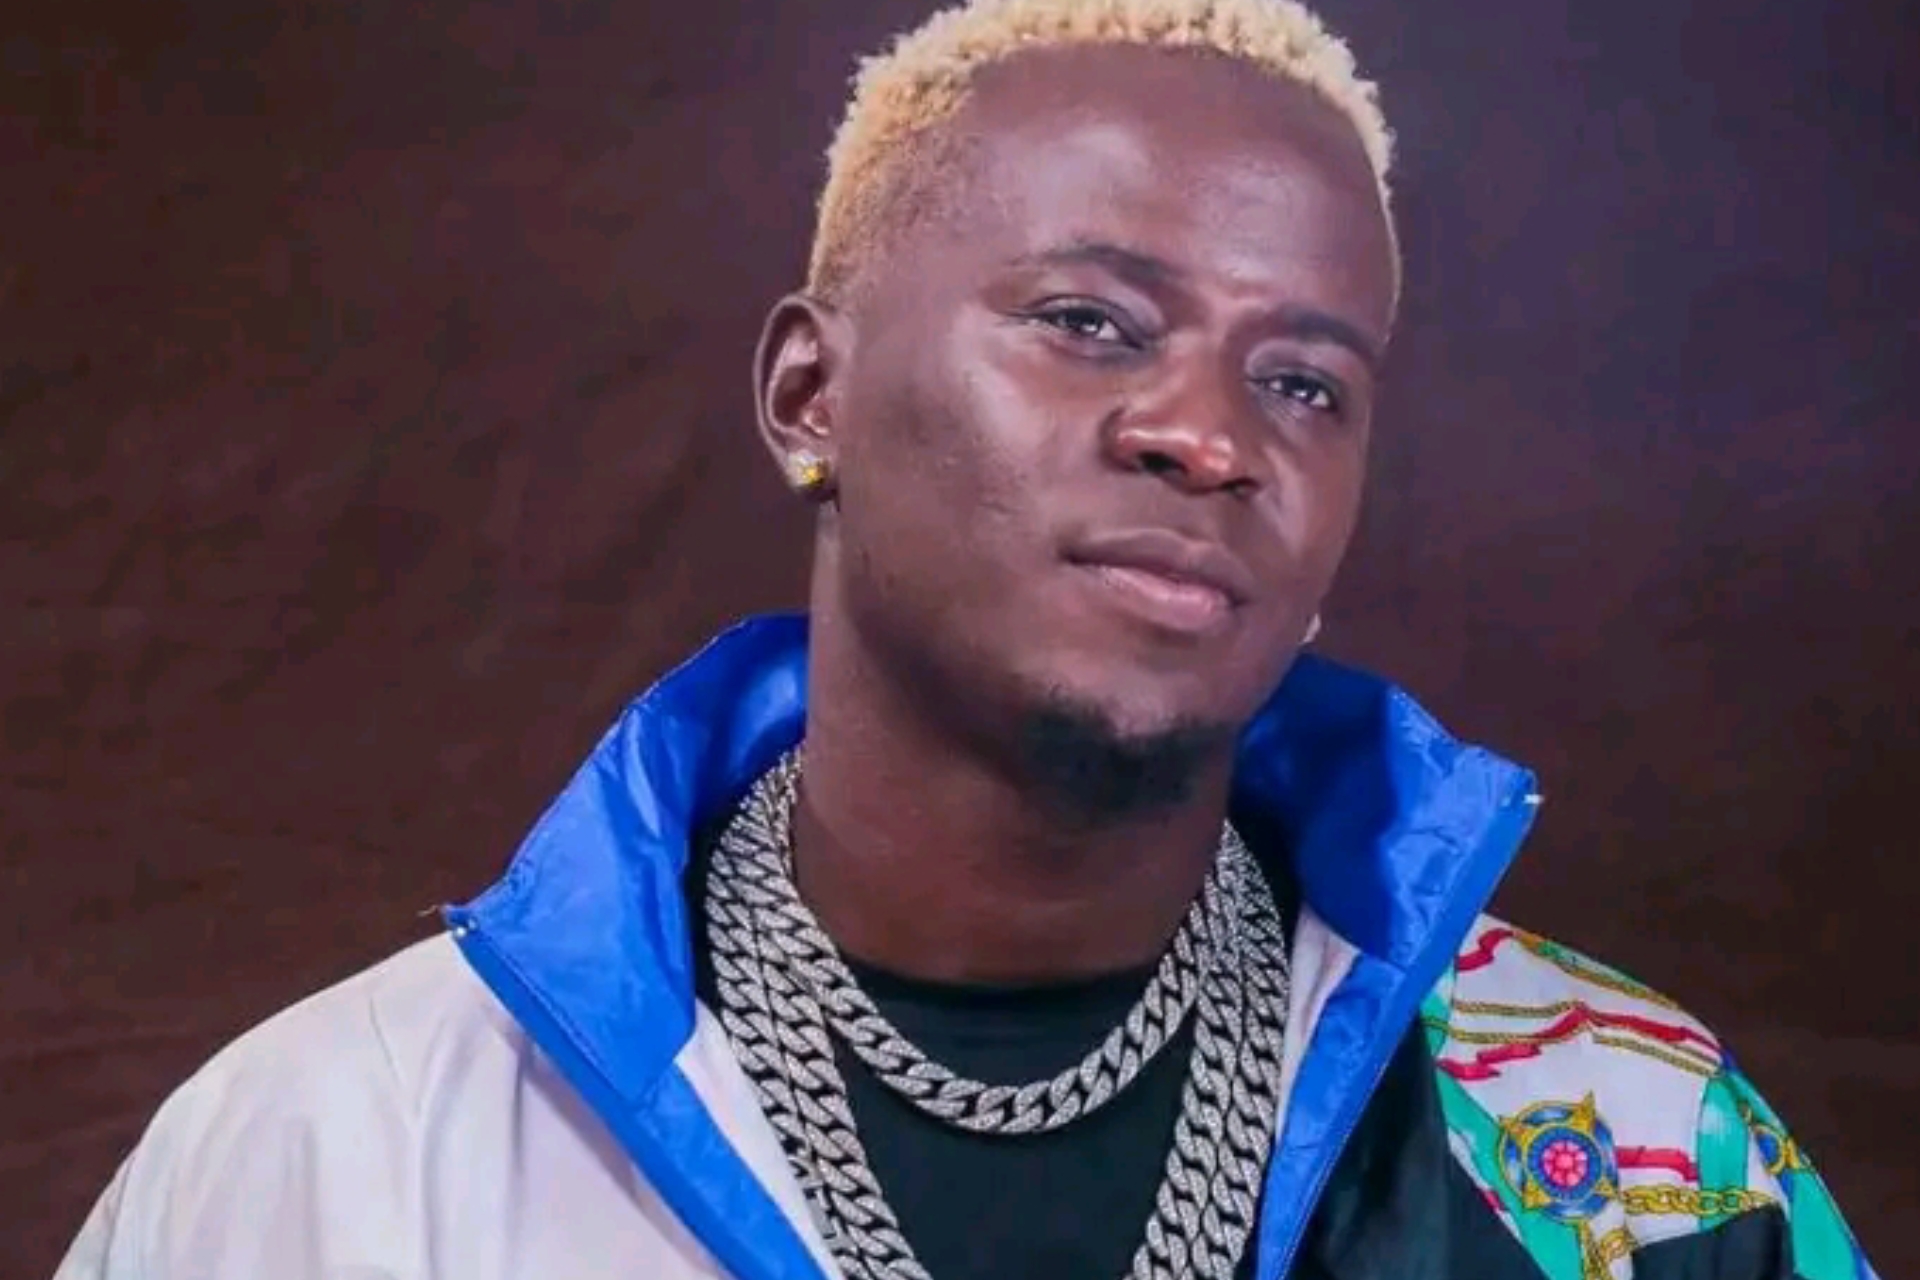 Kenyan Musician Willy Paul has disclosed shocking details on why he ditched gospel Music for secular hits. The singer whose fame has continued to grow after he recently released Gifted Hands Album shared the revelation, highlighting that he passed through hard moments that pushed him out of the gospel music industry. Speaking during an Interview with a local radio station, the singer noted that some undisclosed people made his life gospel music industry so hard that he had to quit. "So much happened. At times you get to a point where you feel that 'If I don't quit I'll die'. You are left with no choice but to leave such environment. A lot things happened when I was in gospel music music industry. I don't want to Start finger but they know themselves," he said. The 'Kitanzi' hitmaker went further and said that ditching Gospel music was a good decision, or he would have other resoryed to suic!de. He noted that he doesn't regret the decision. "The people I was working with know well what they did to me. I chose not to speak but made a decision I don't regret to date. Should I not have taken the move, you would have heard stories that I became made or committed su!cide. The environment was so toxic."